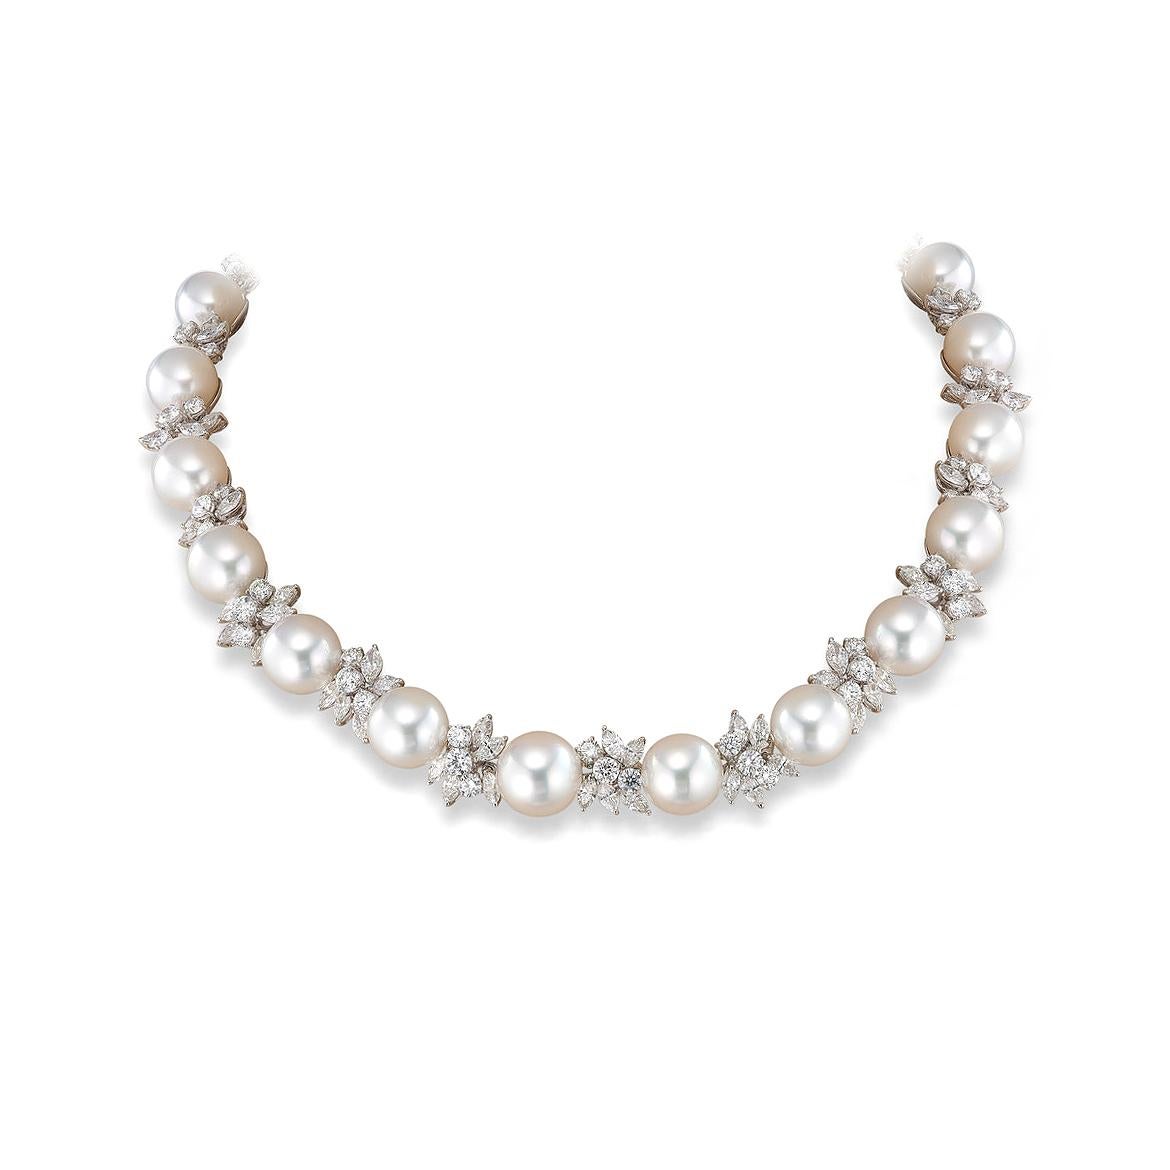 Necklace in 18kt white gold set with 20 South Sea pearls 14.6mm-12.5mm, 100 marquise cut diamonds 22.65 cts and 62 diamonds 14.92 cts   